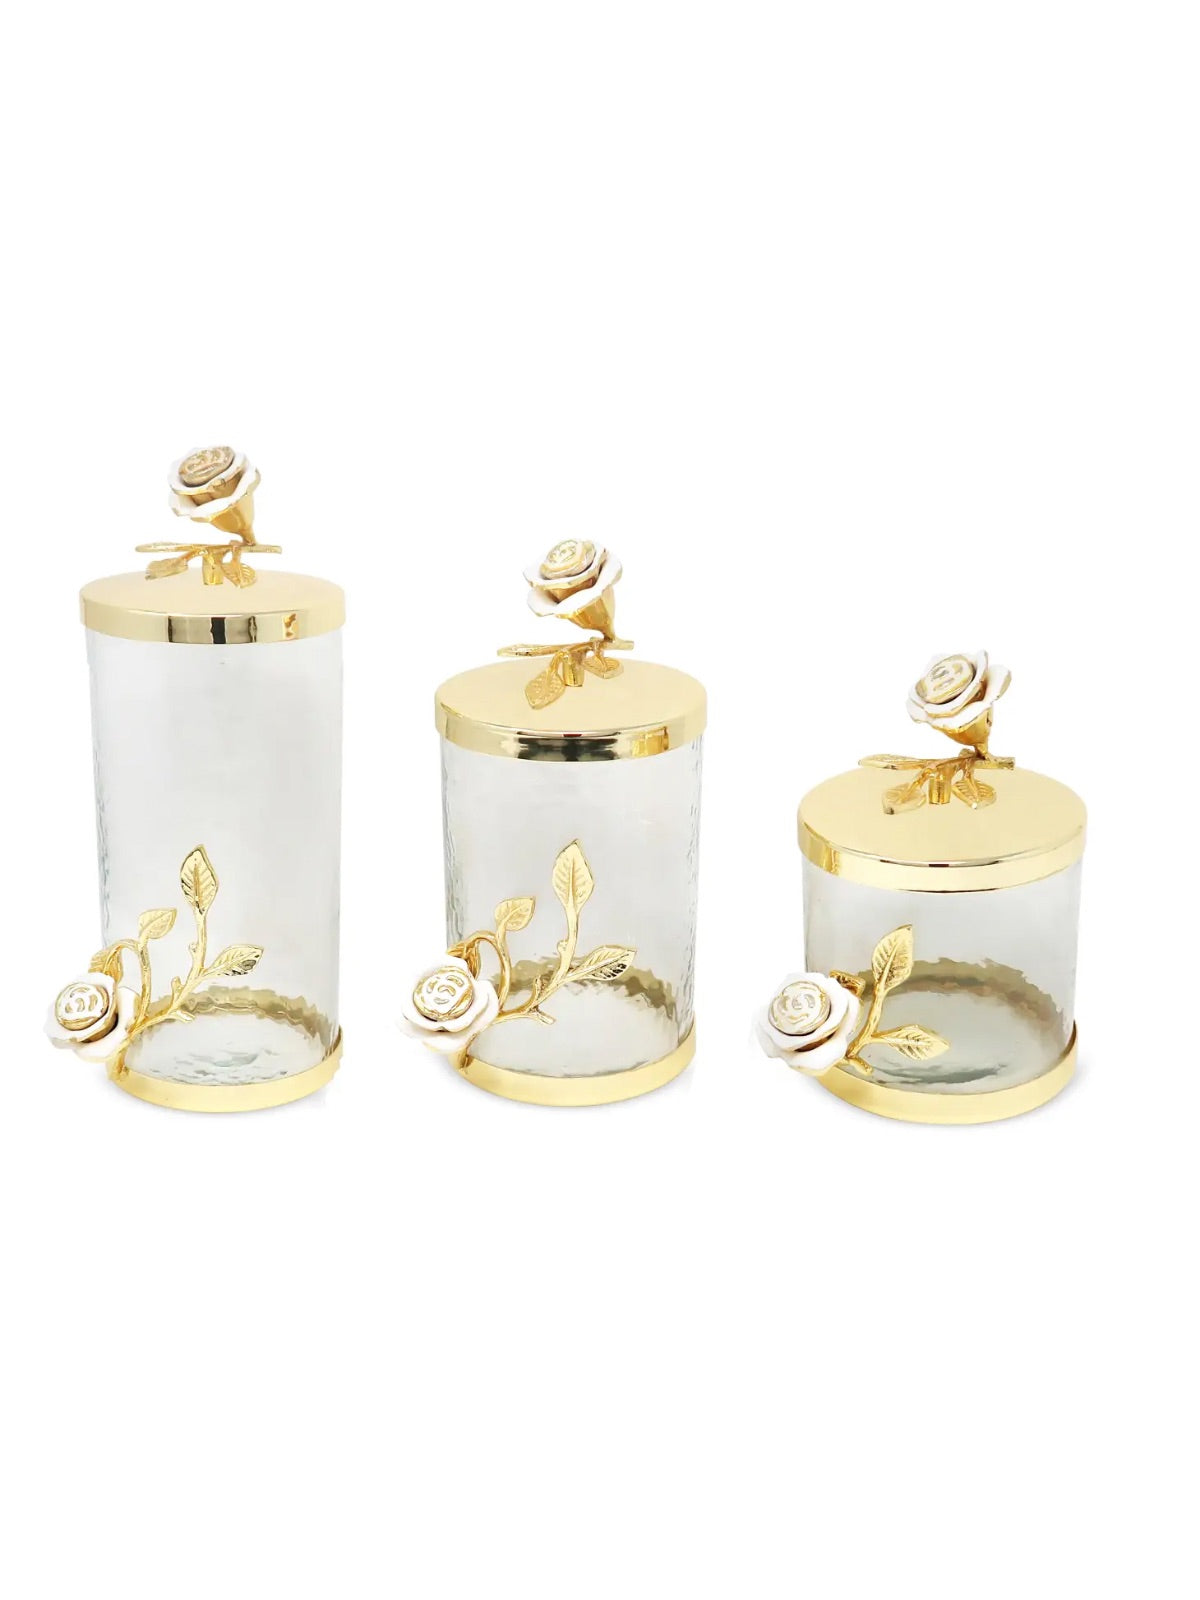 Hammered Glass Canister with White and Gold Rose Design, Stainless Steel Gold Lid, Offered in 3 Sizes – Elegant and Versatile Kitchen Storage Solution